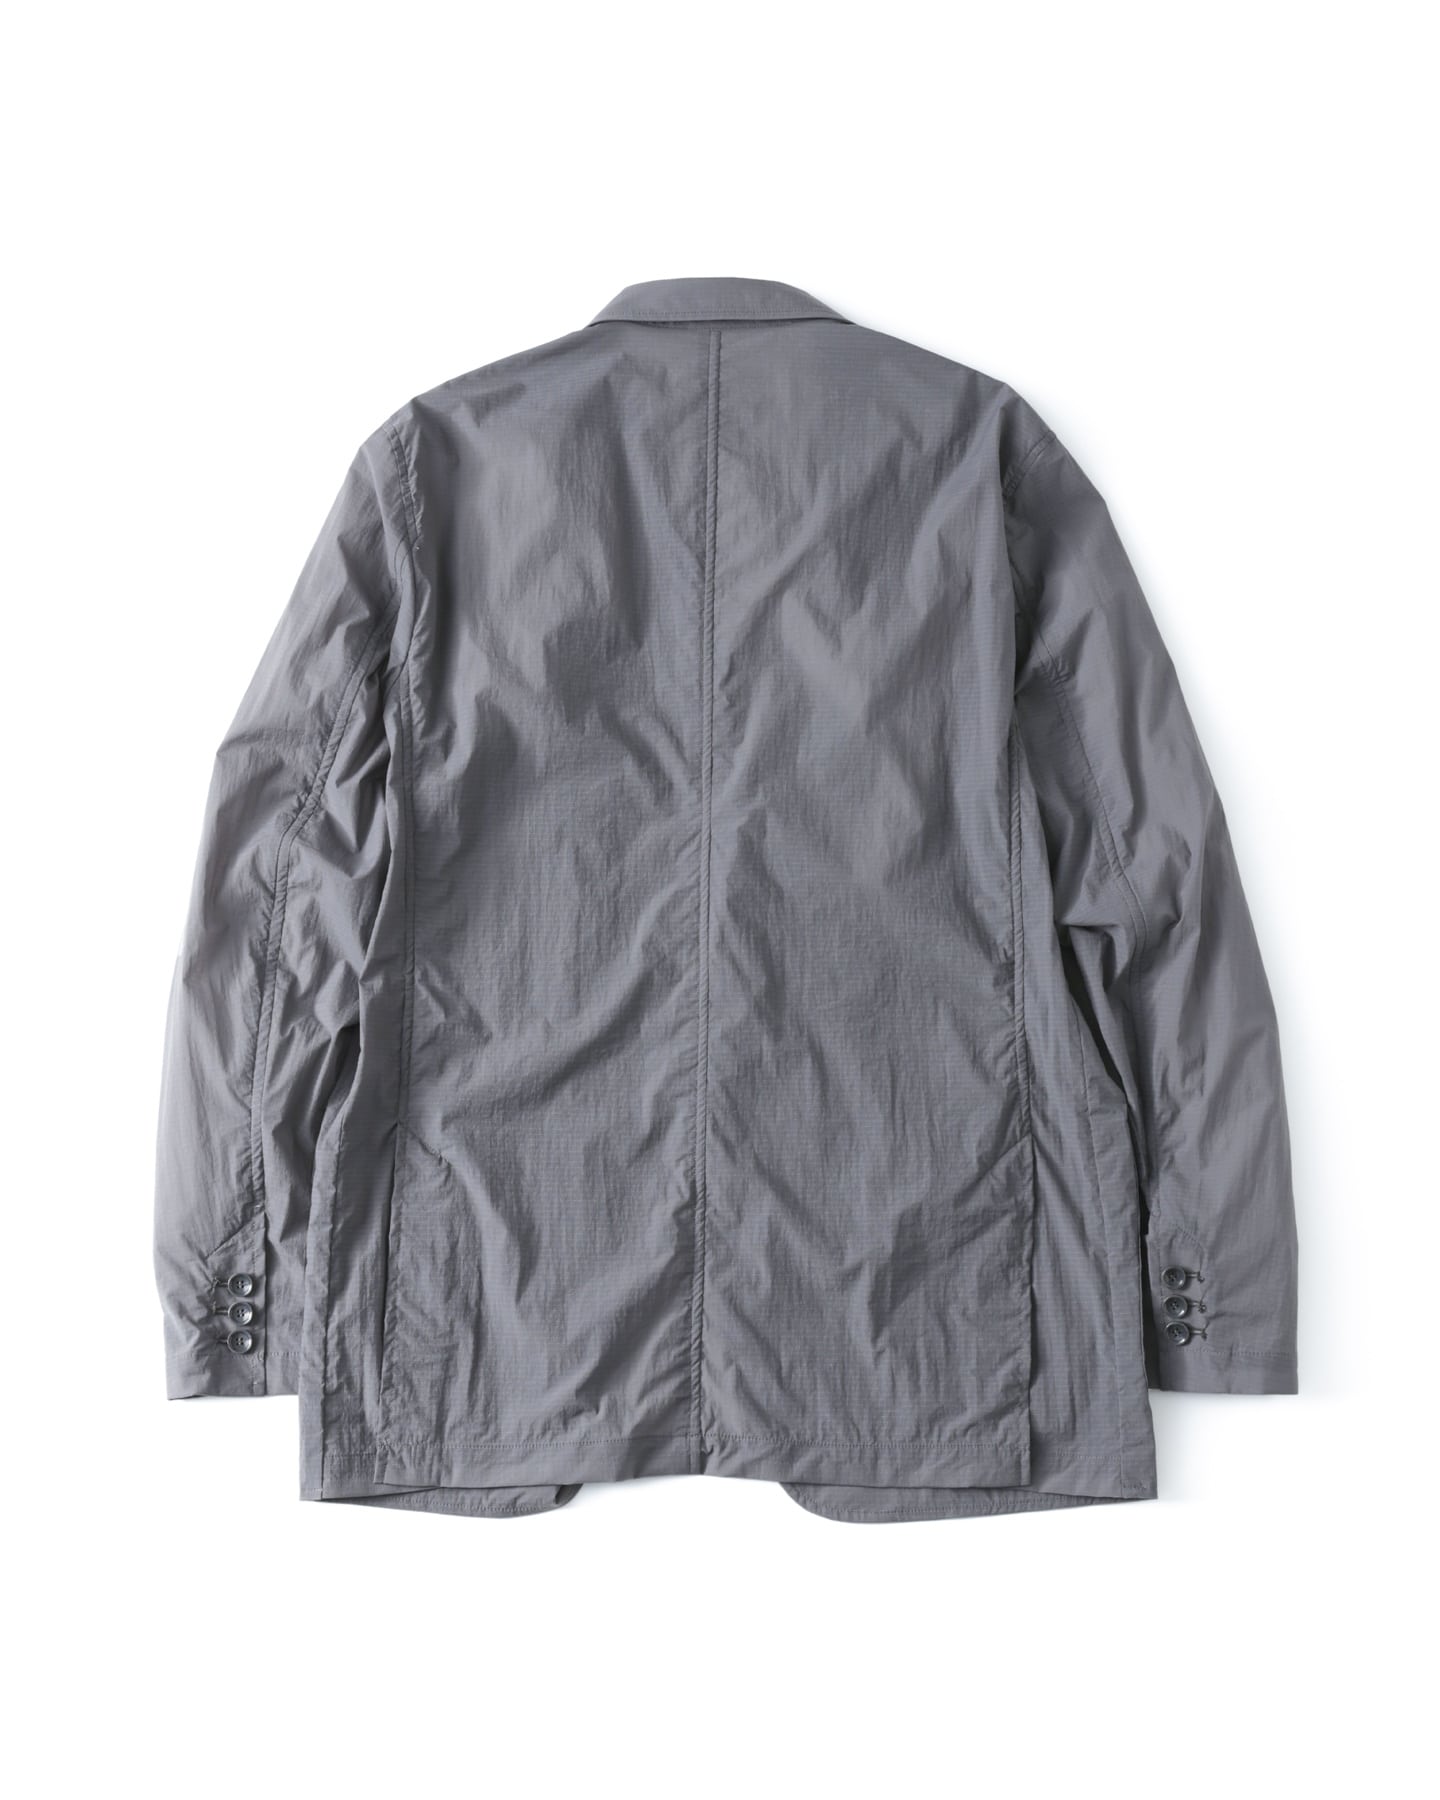 SOPH. | LIGHT WEIGHT STRETCH RIP STOP PACKABLE 2B JACKET(M GRAY):